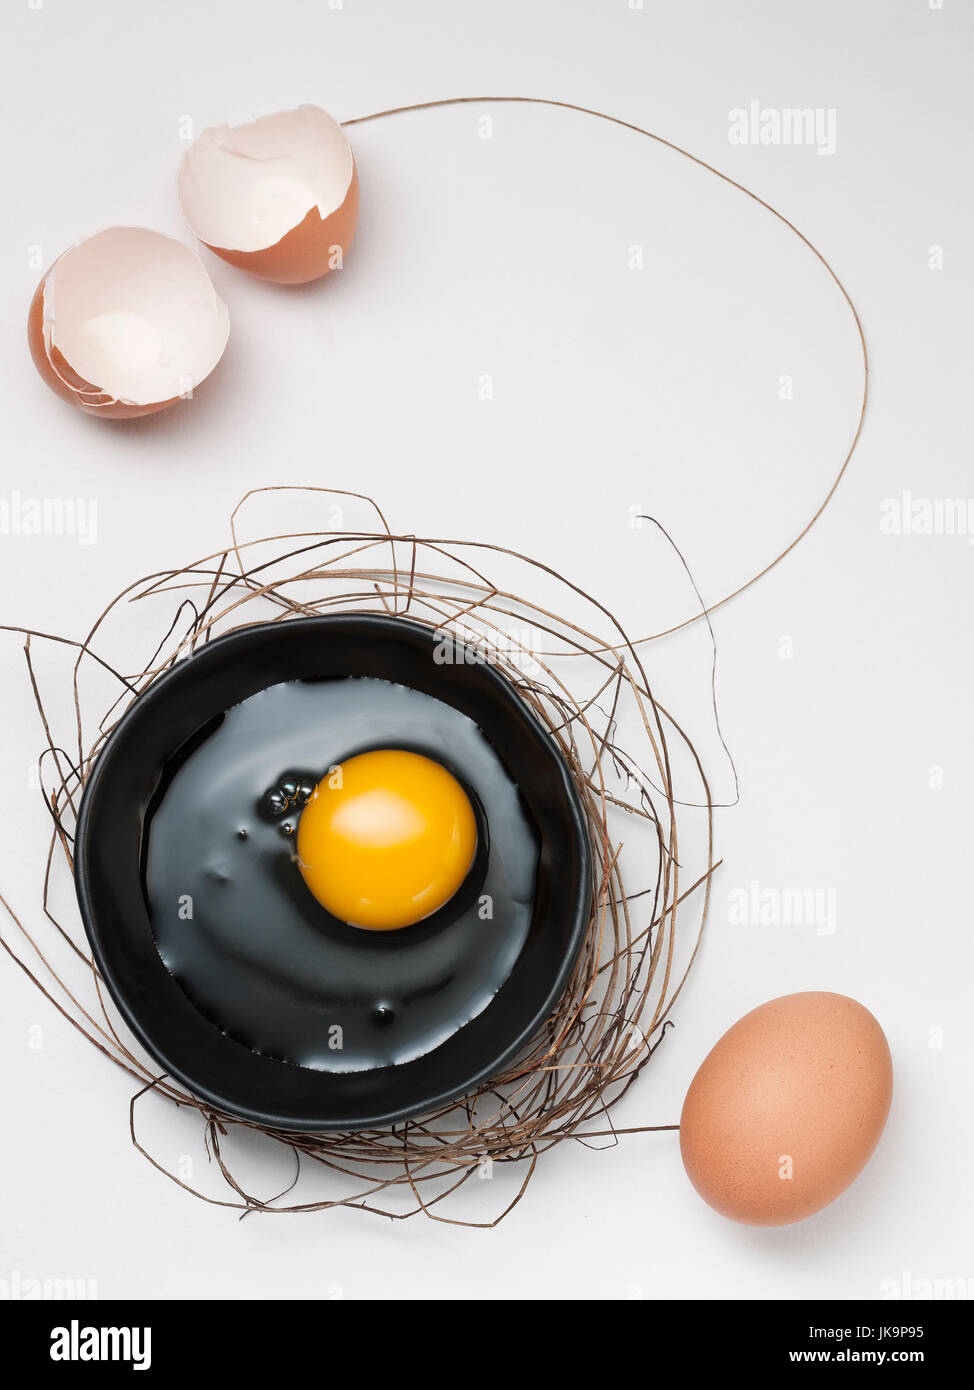 art of eggs on the black dish with the bush or Bird's nest and seasoning on white wooden background Stock Photo